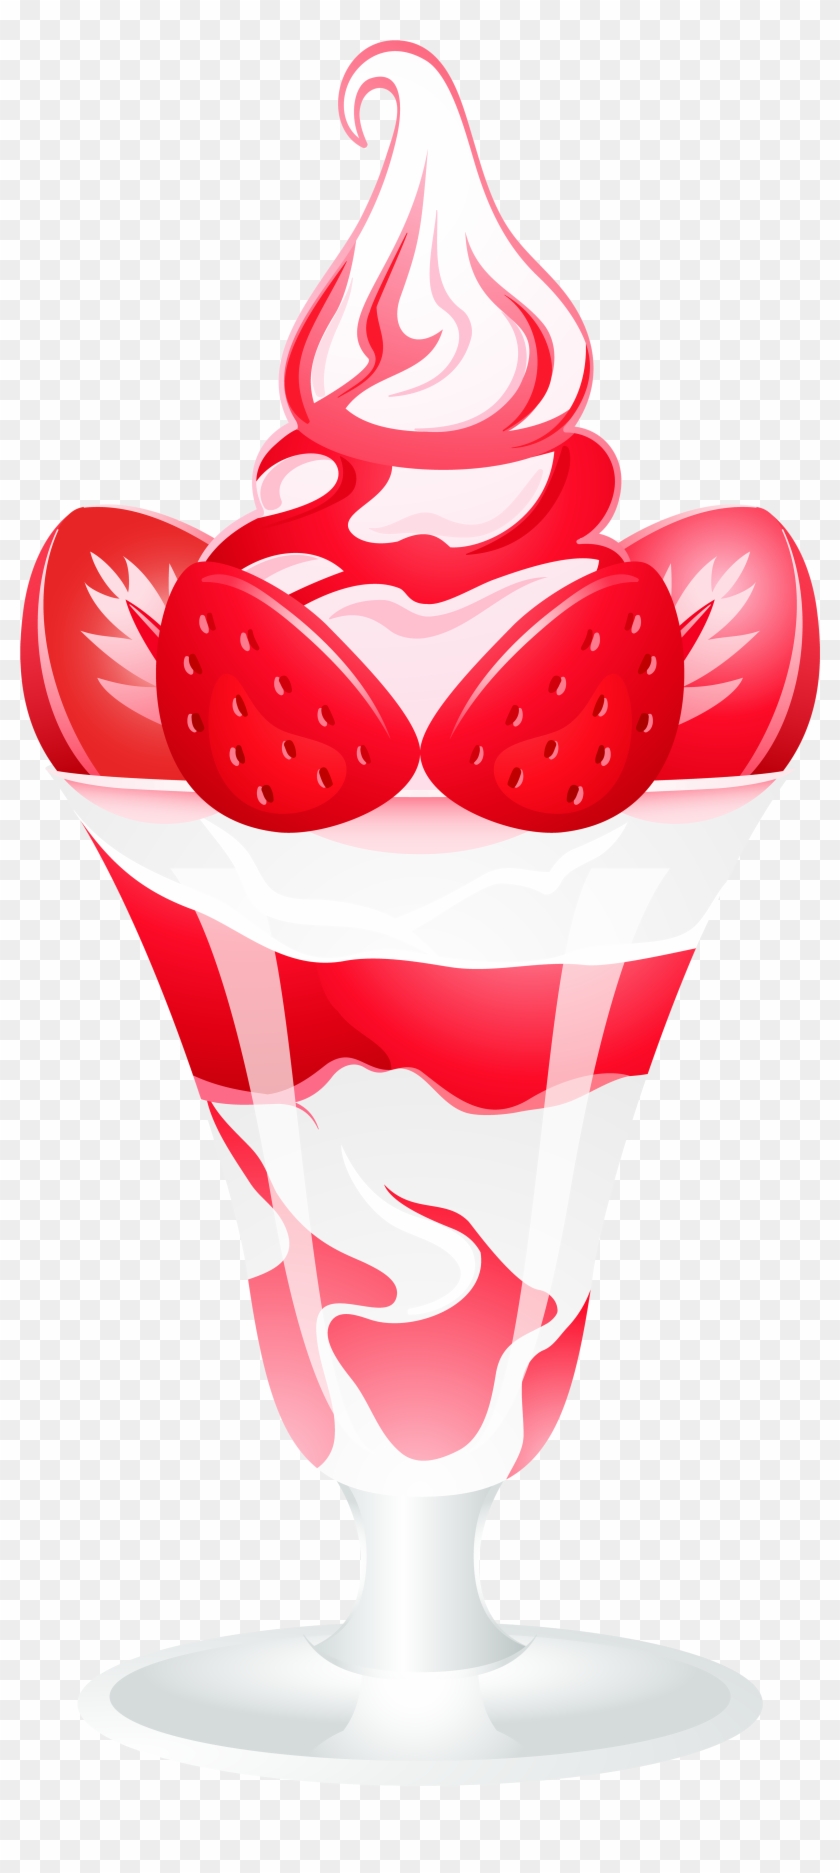 Ice Cream Sundae With Strawberries Png Clip Artt Image - Strawberry Ice Cream Clipart Transparent Png #182150